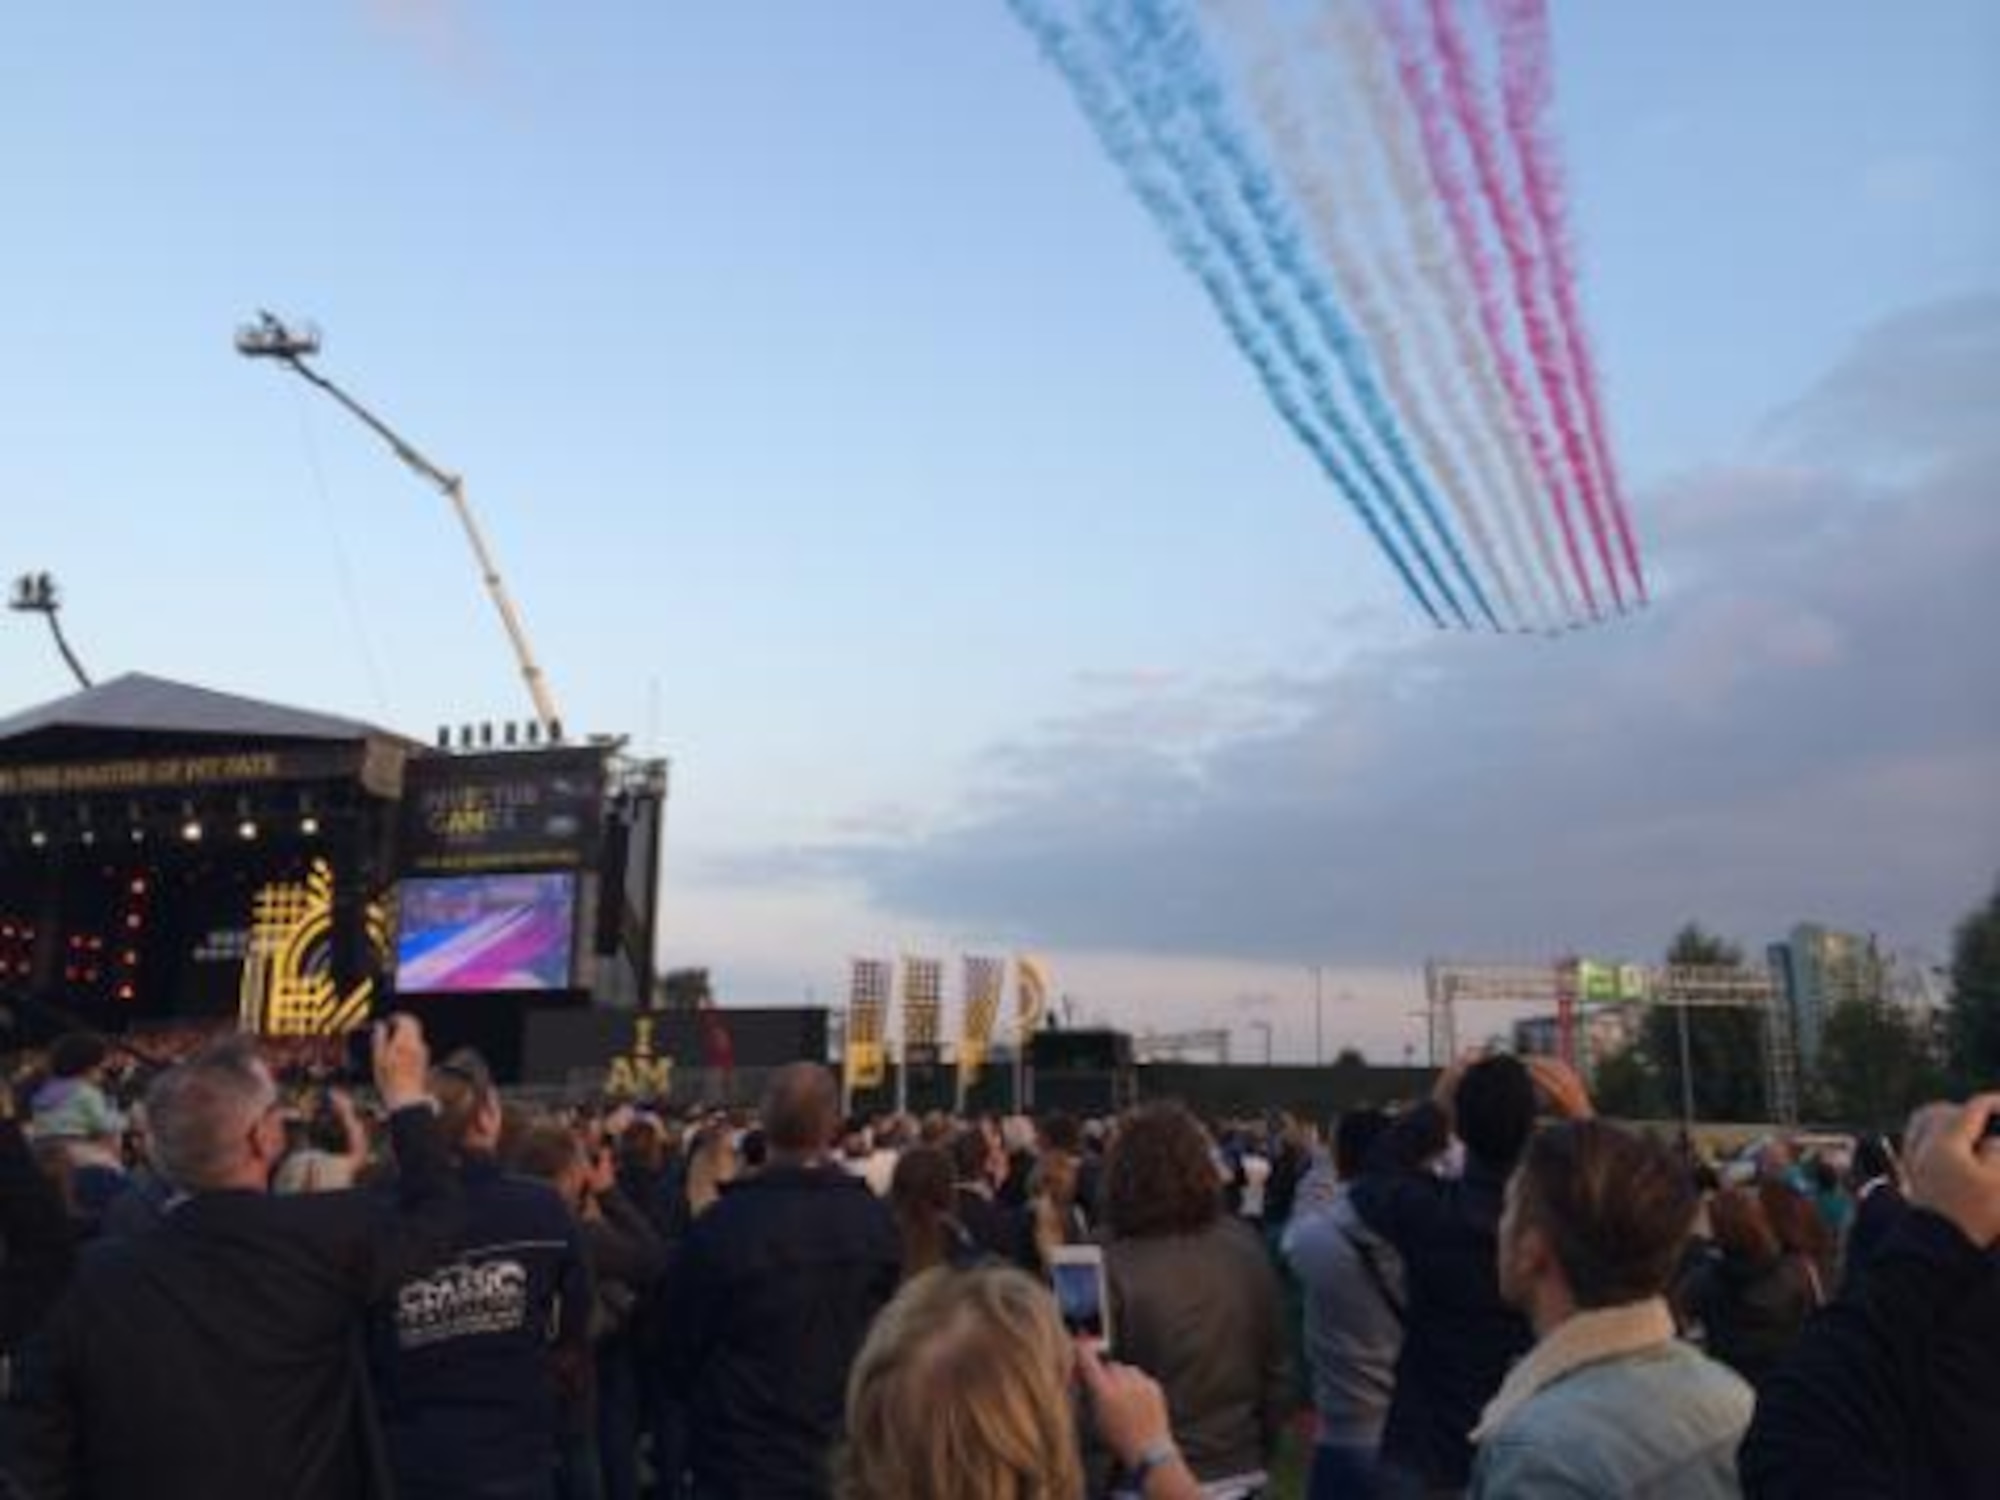 A flyover by the Royal Air Force’s aerial aerobatic team, The Red Arrows, helped kick off the opening ceremony for the inaugural Invictus Games Sept 10, 2014, in London. The Invictus Games are a Paralympic-style contest that features wounded warriors from different nations competing in various events. (Courtesy photo)